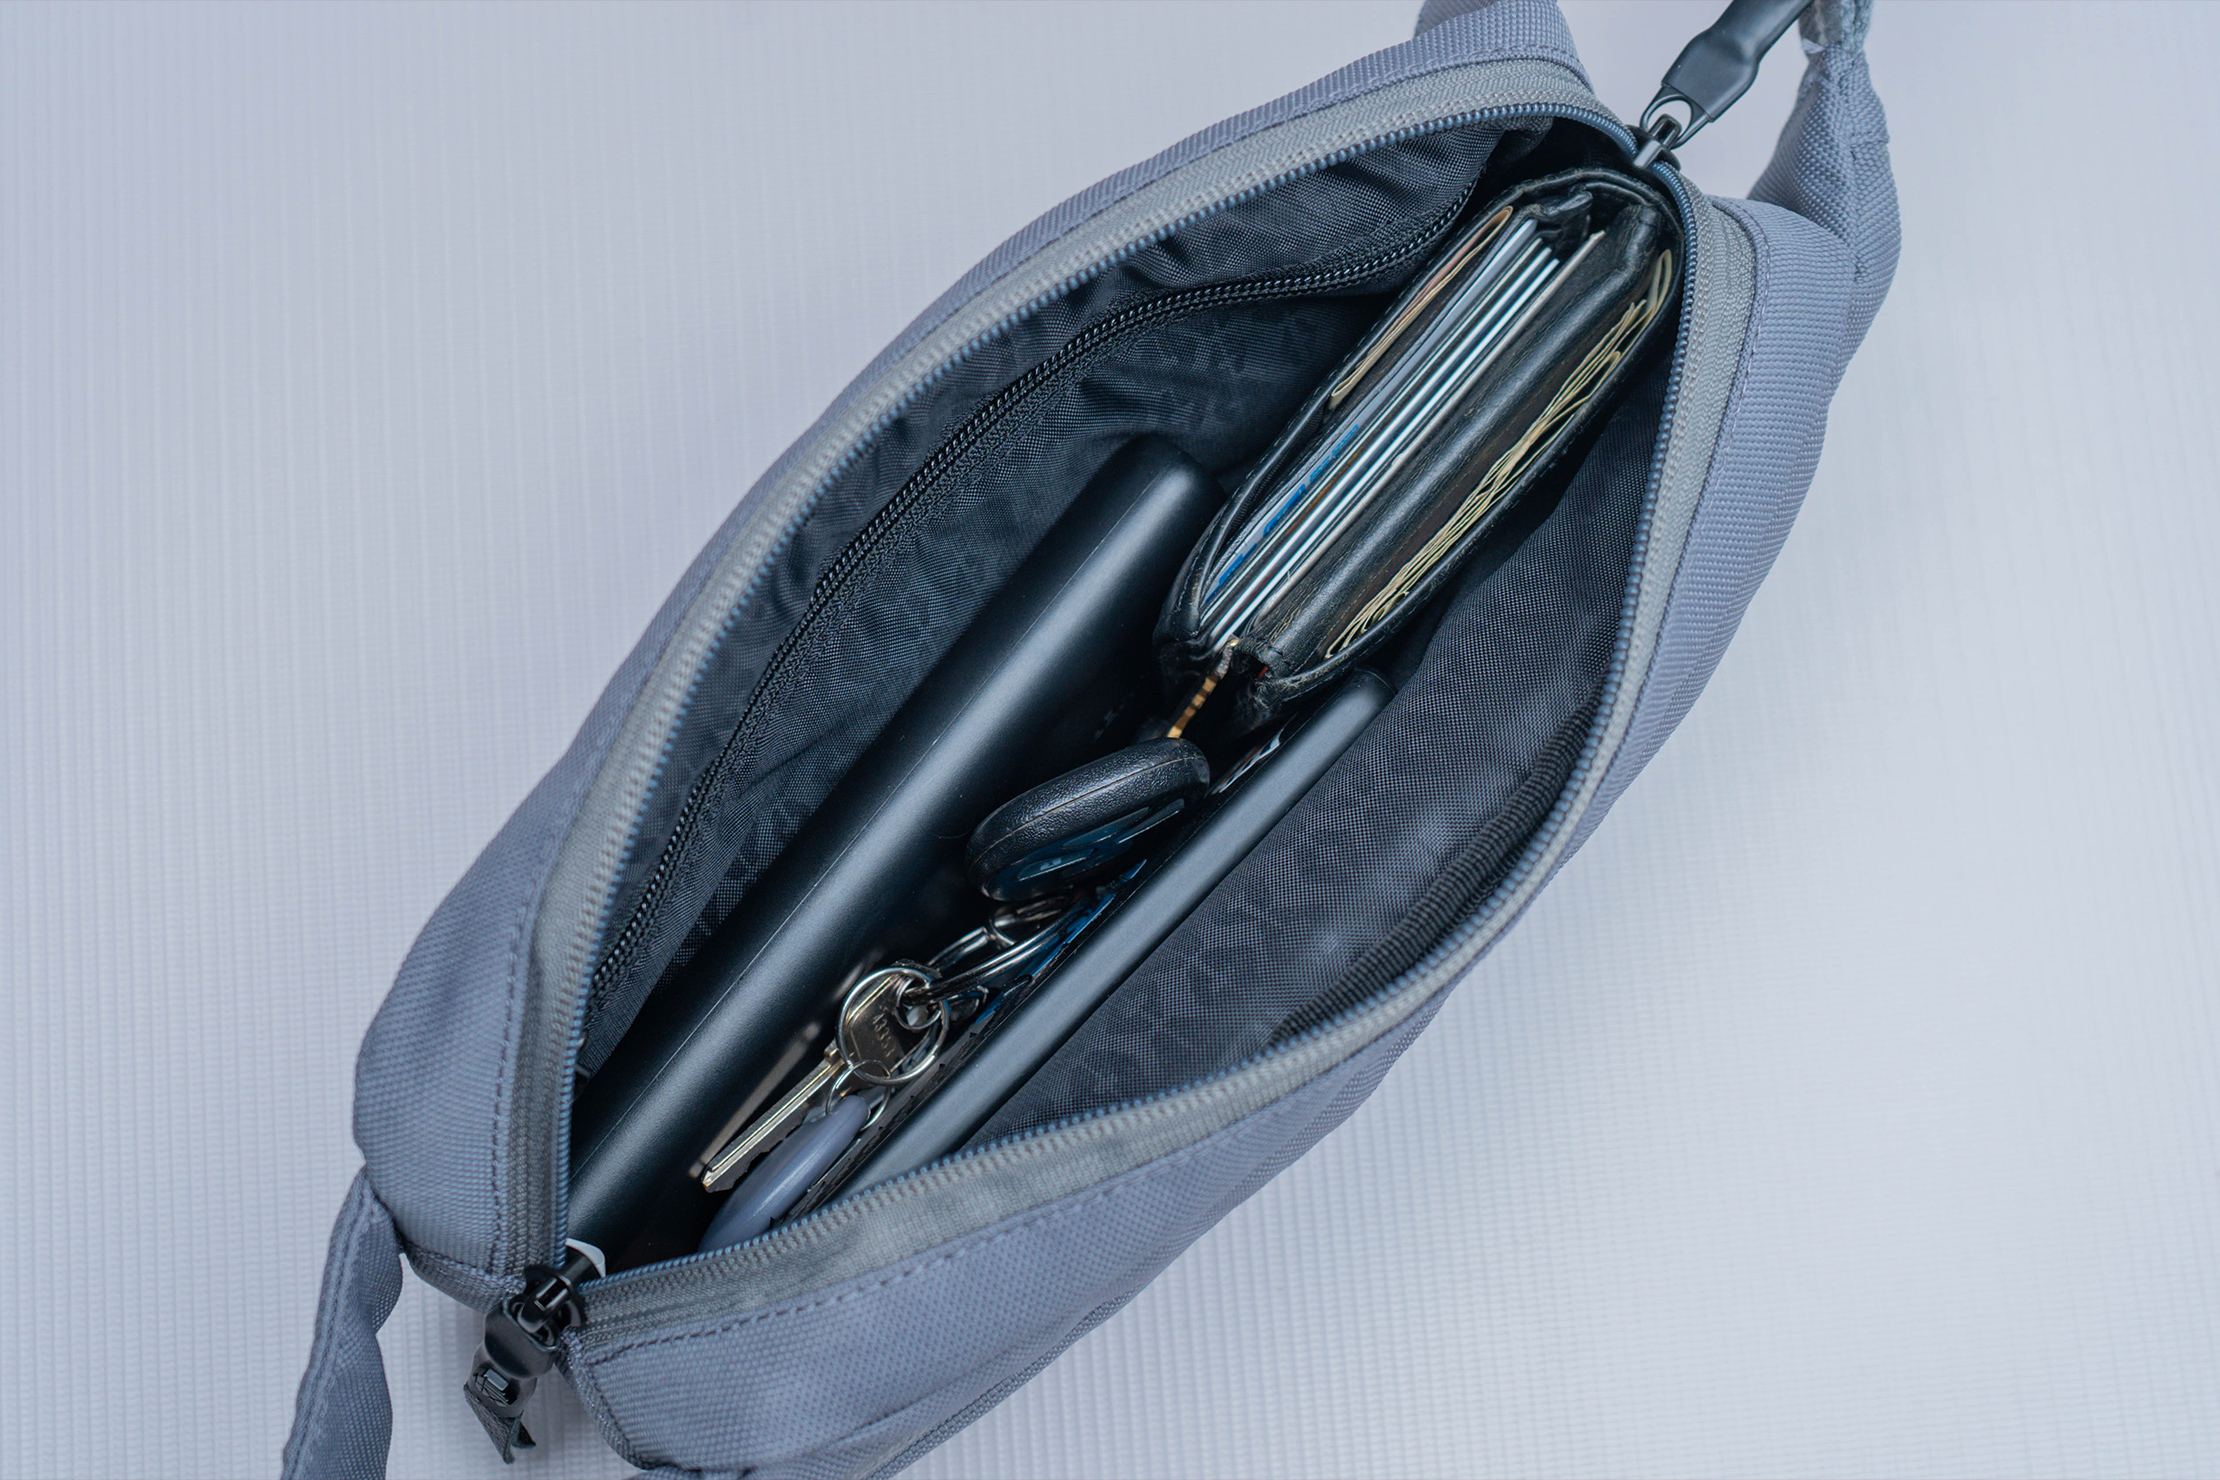 HEX Evolve Sling Main Compartment